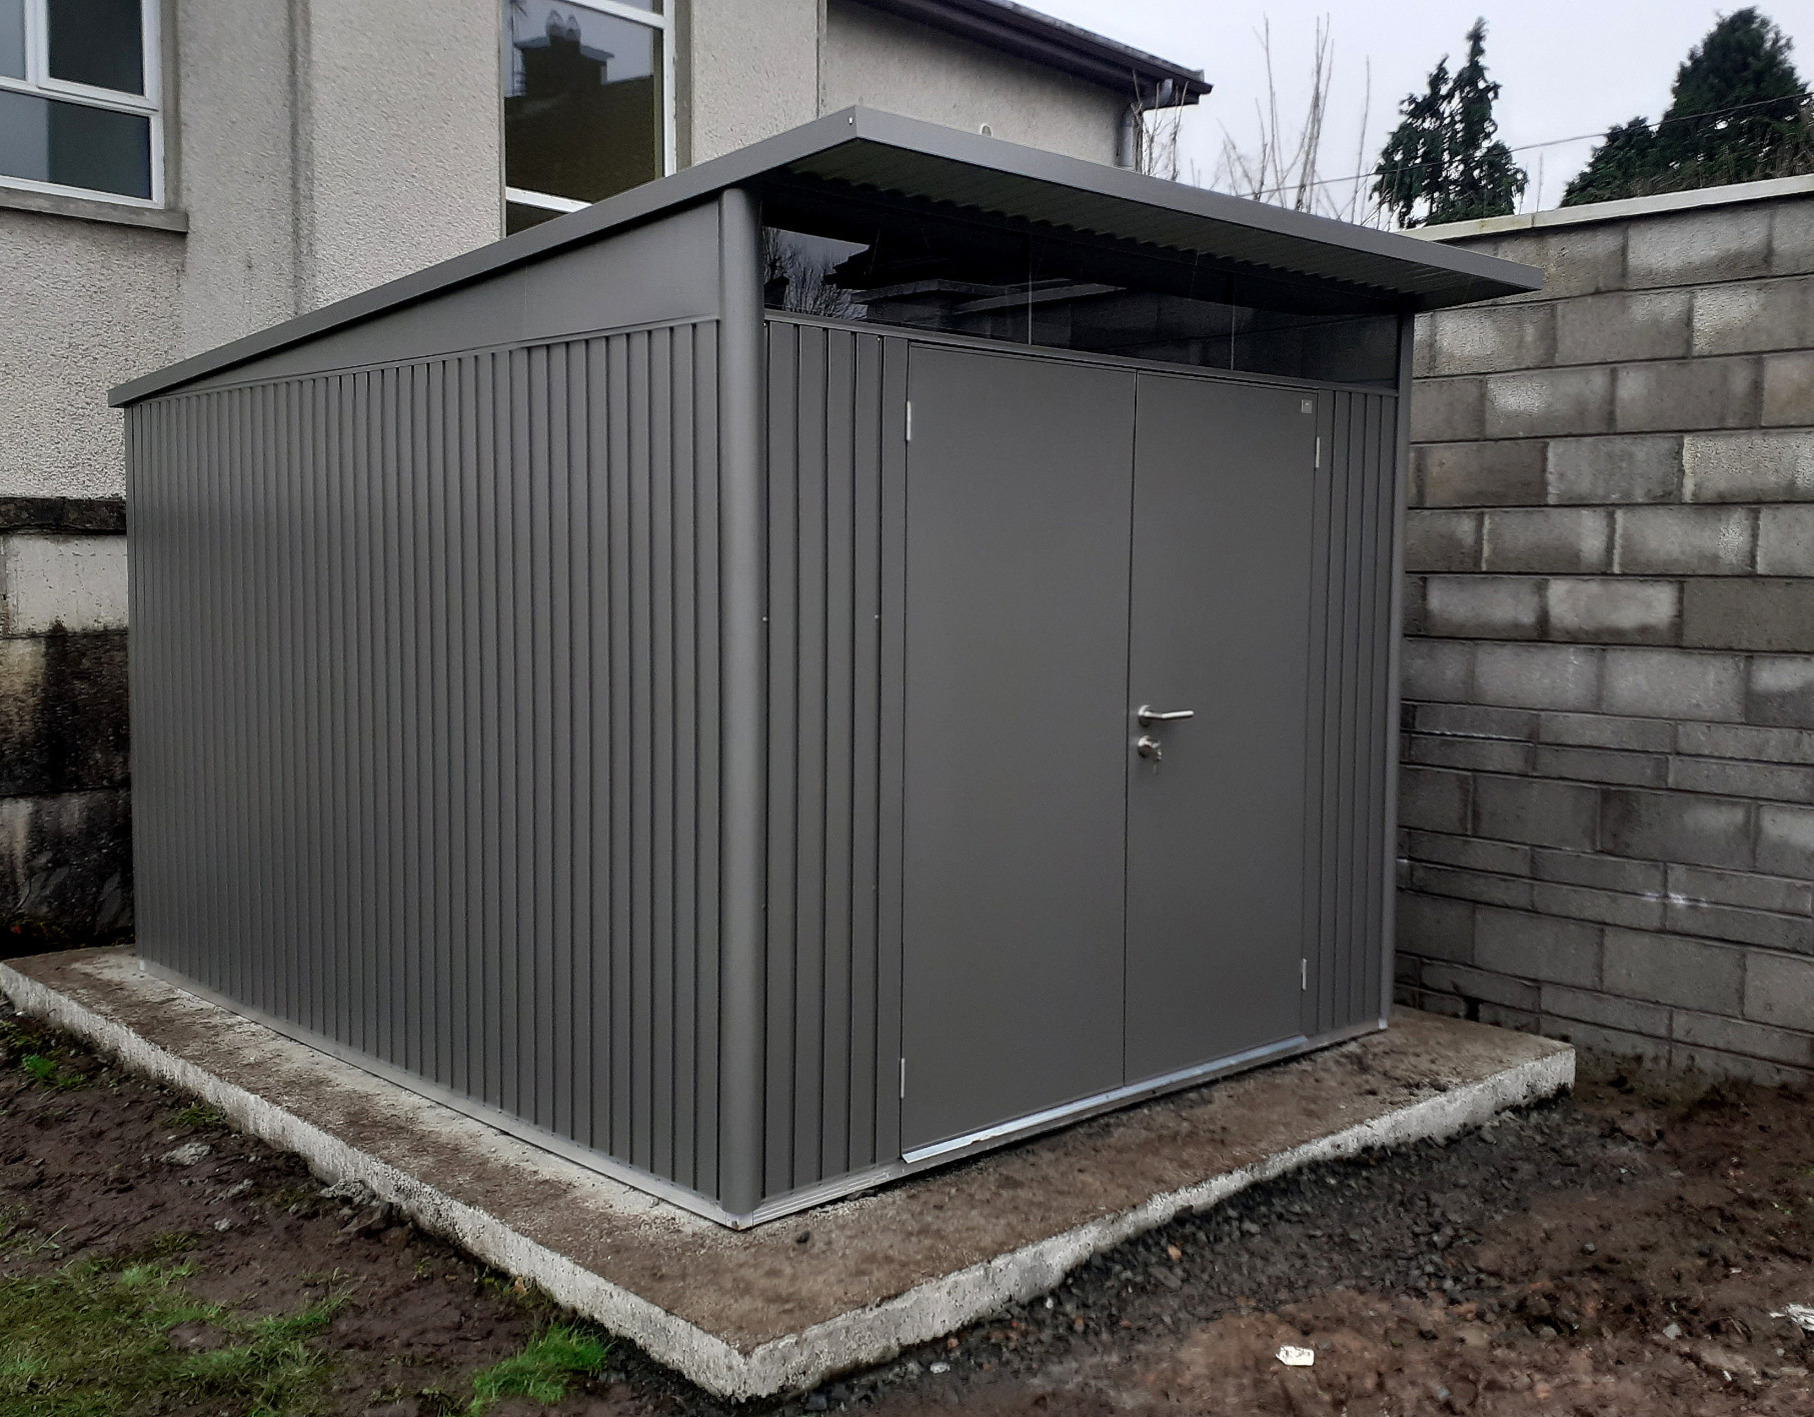 Biohort AvantGarde A8 Garden Shed in metallic quartz grey with double doors, supplied & fitted in Limerick | Owen Chubb Ireland's Leading supplier of Biohort Garden Sheds & Storage Solutions | Supplied + Fitted Nationwide